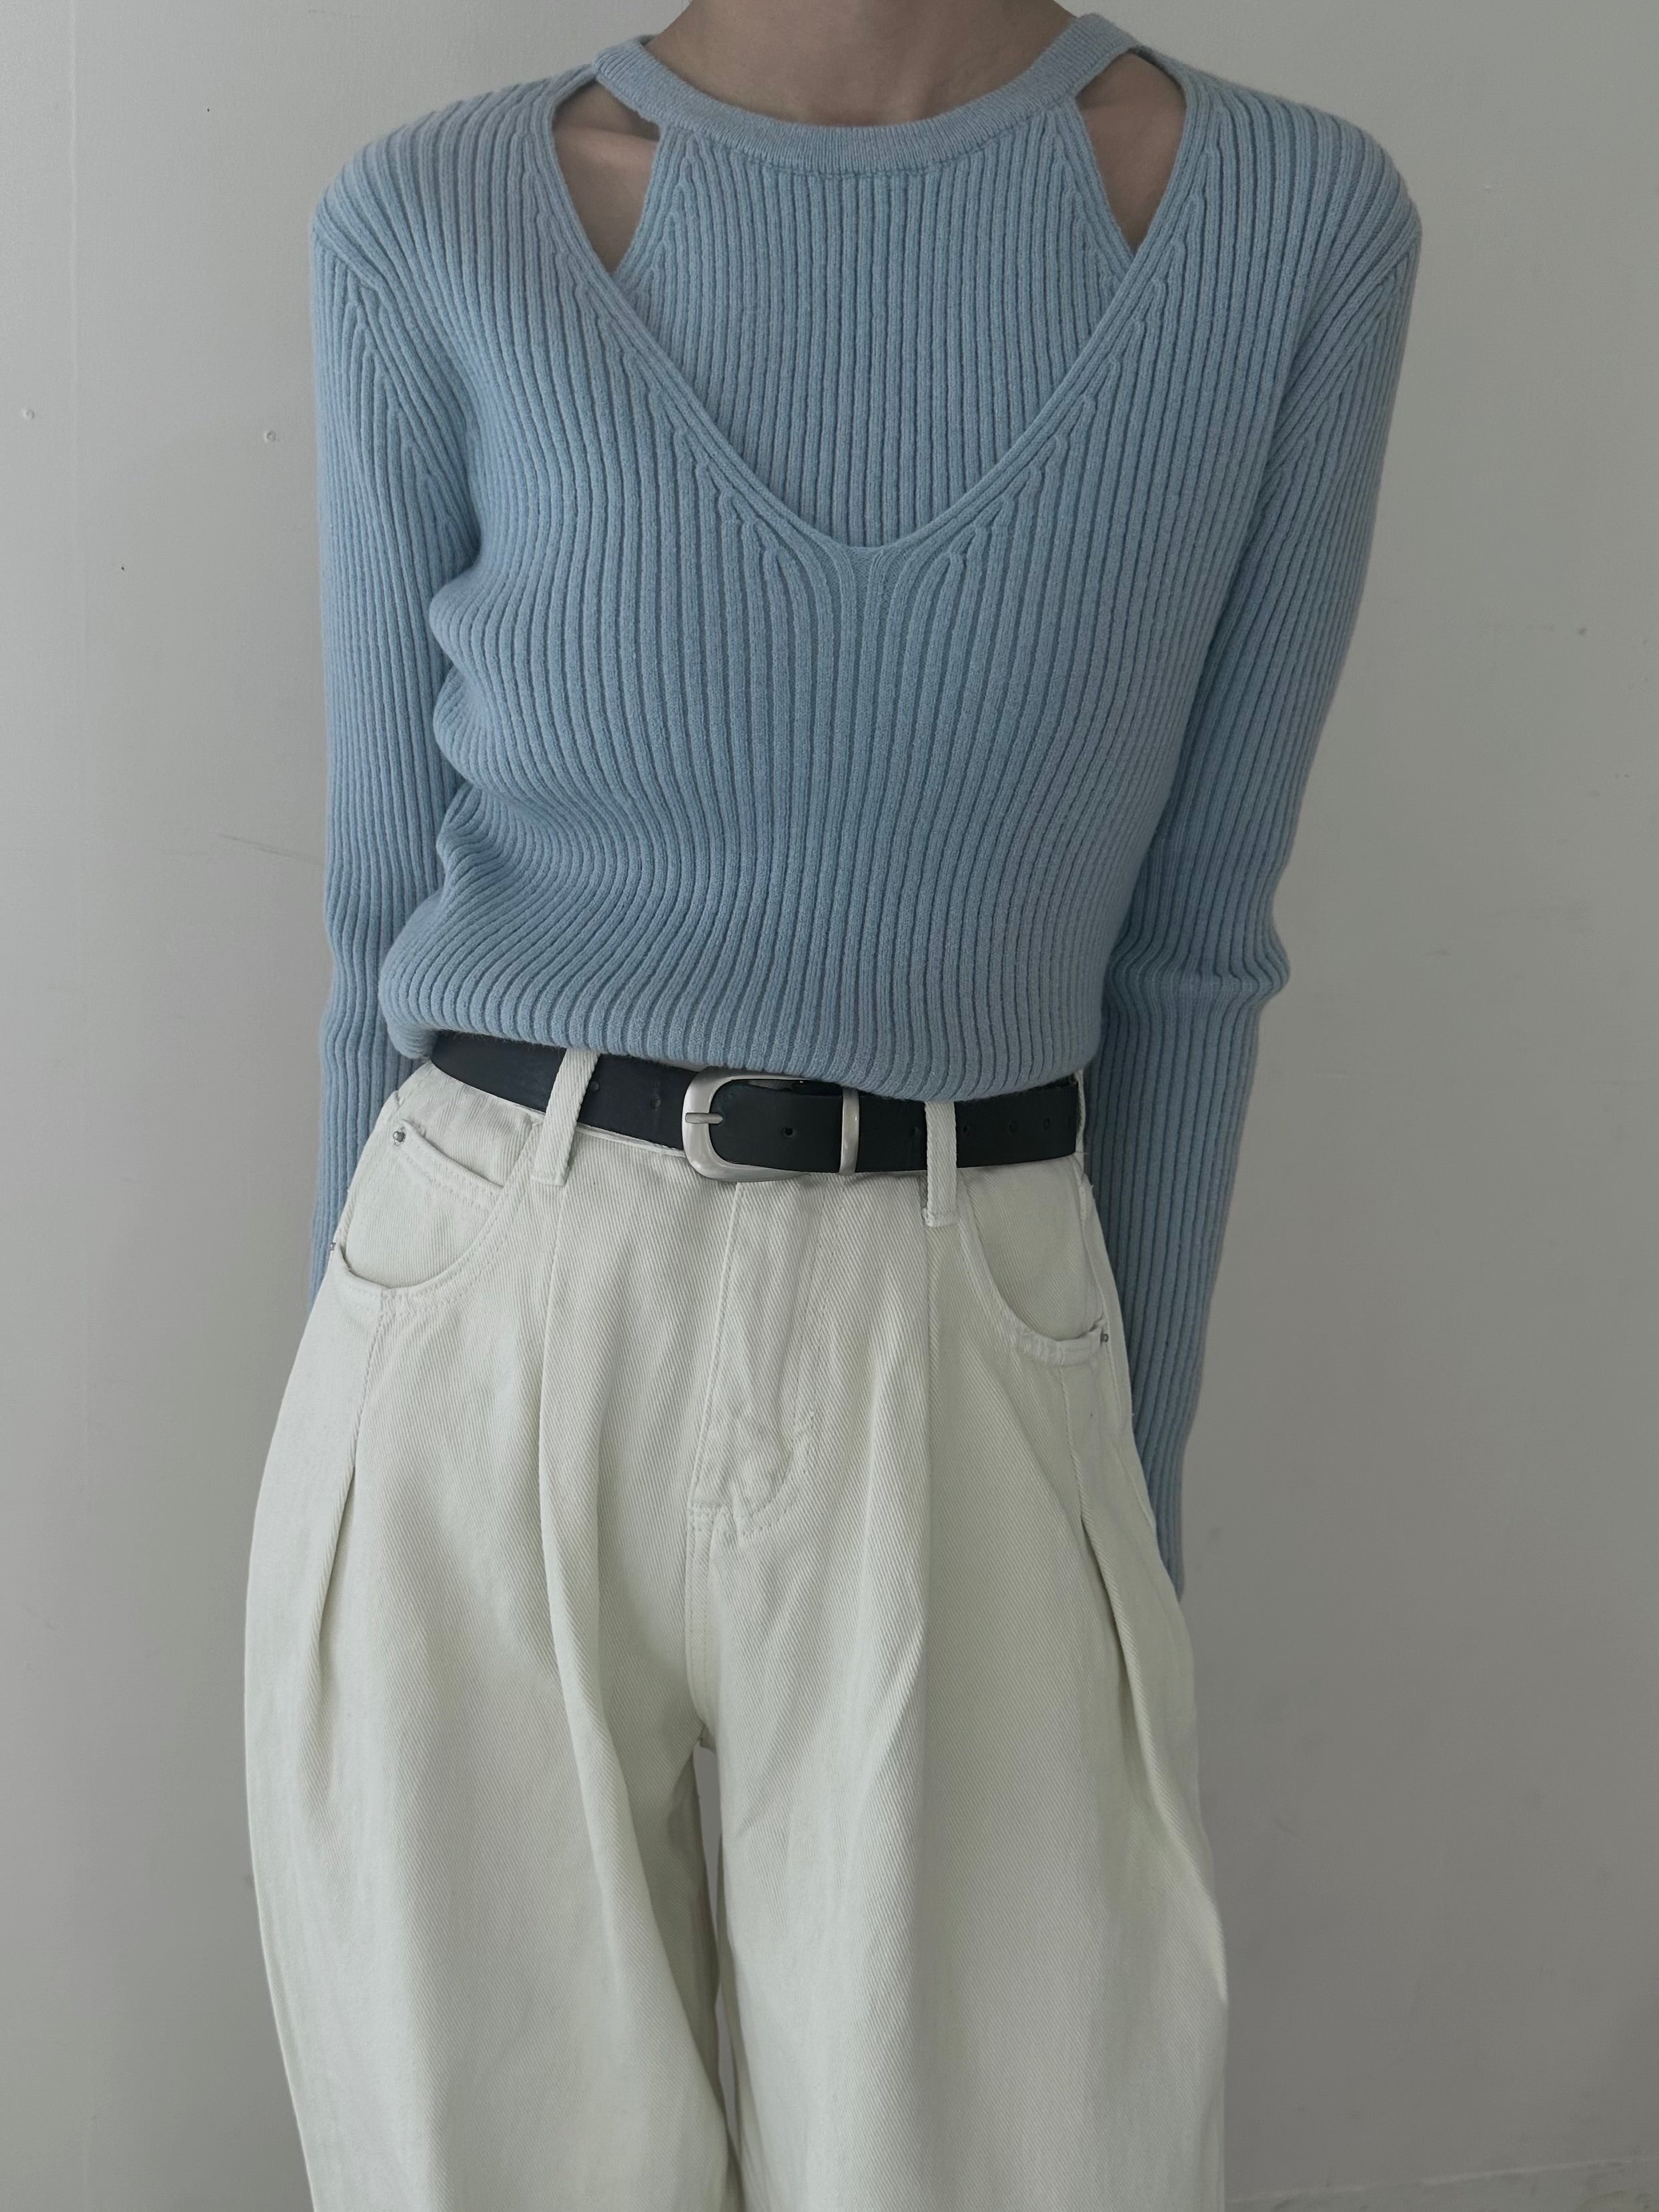 Layered design knit tops